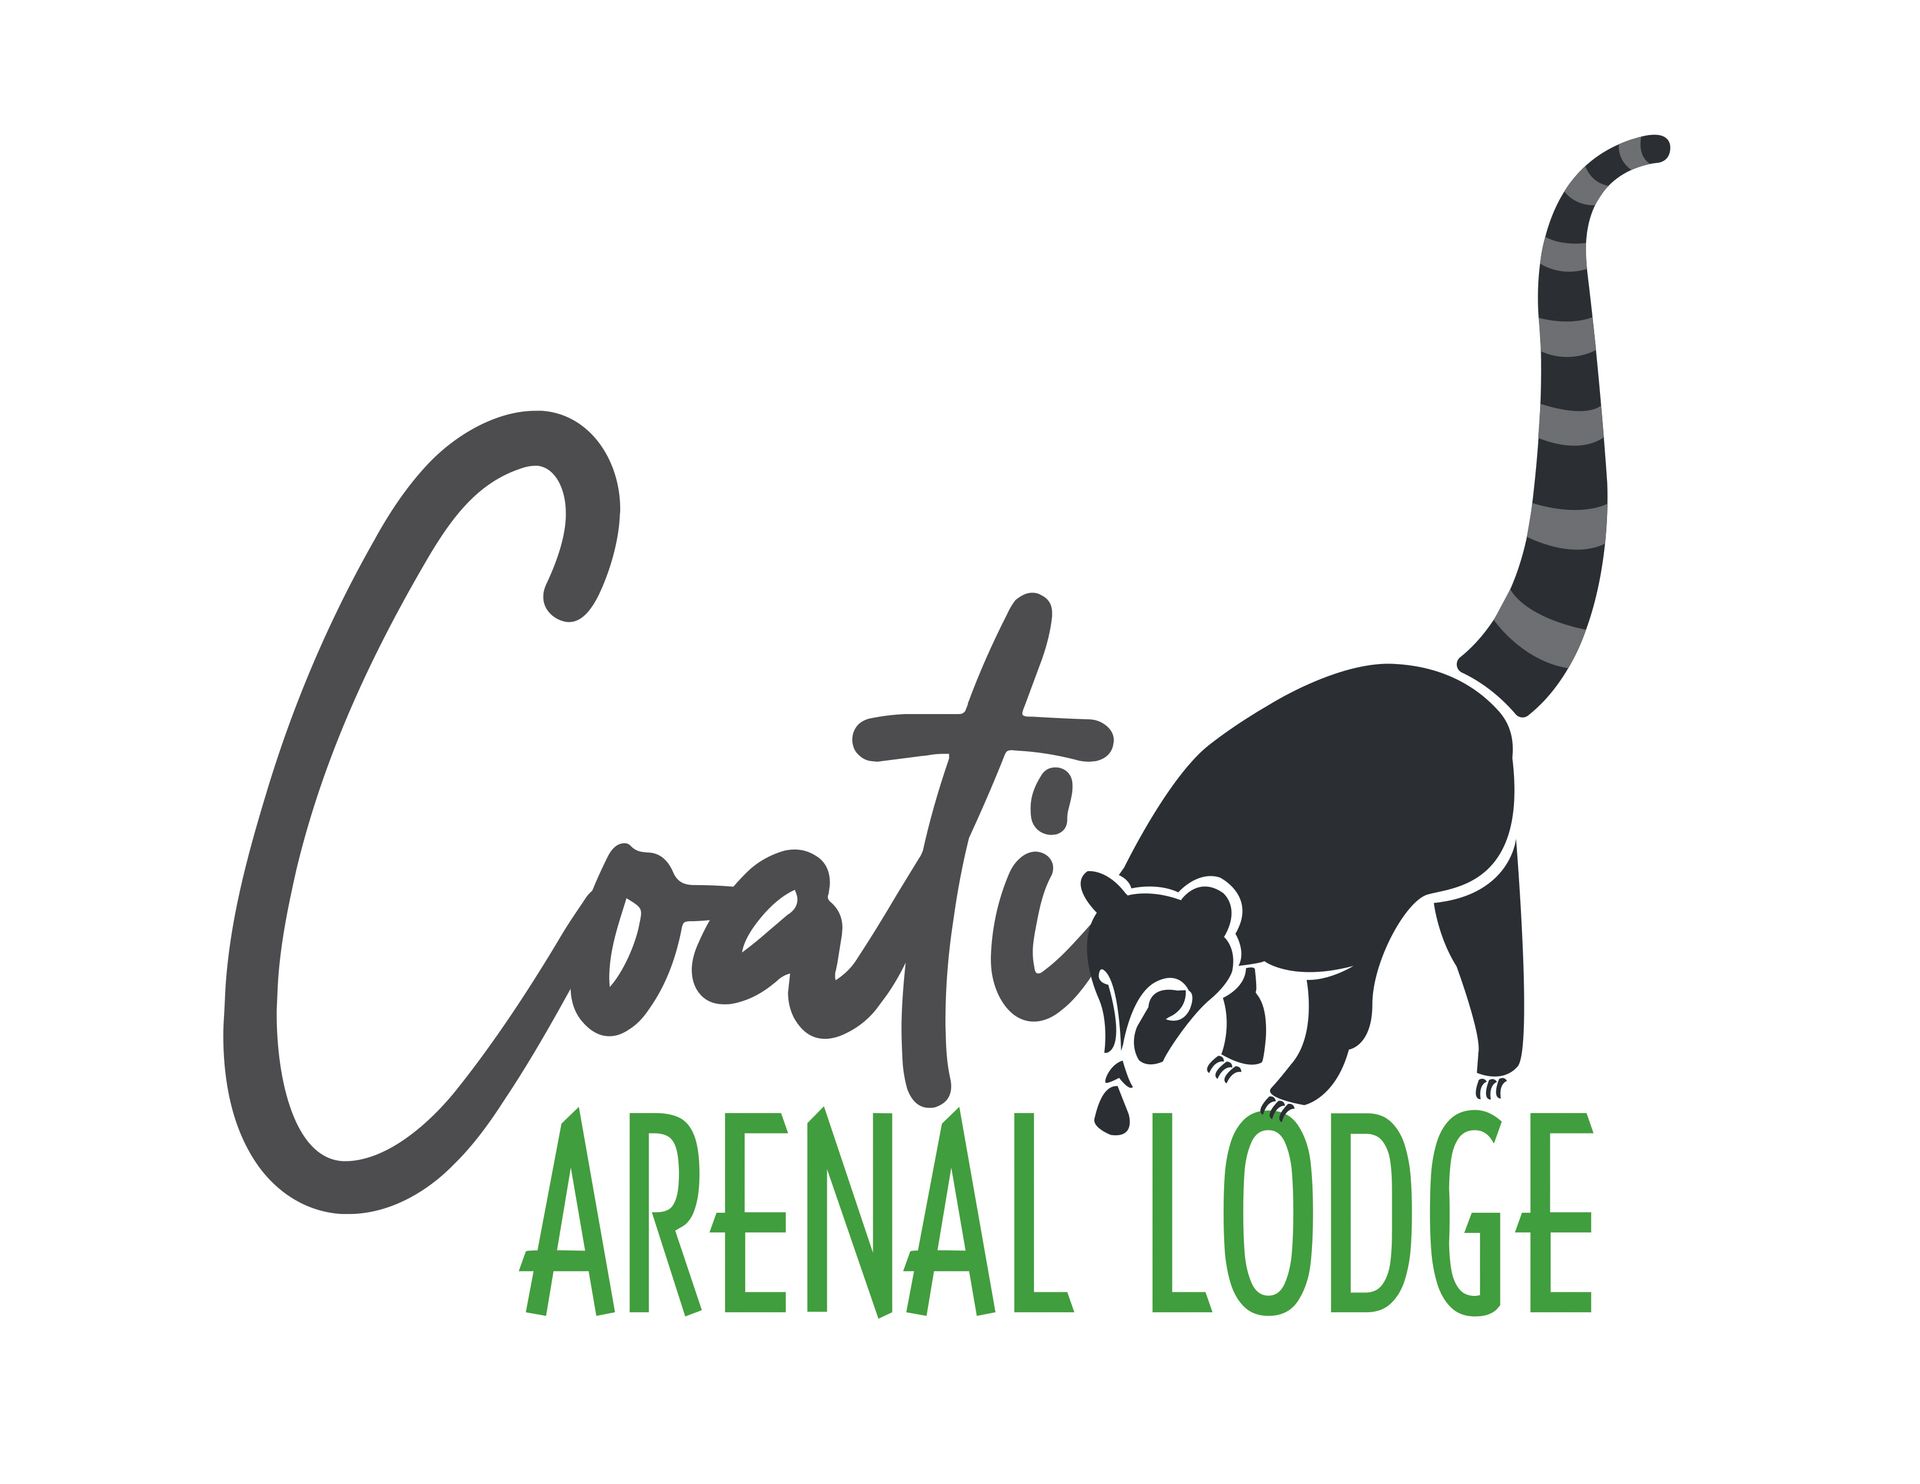 the logo for coatis arenal lodge shows a raccoon with a long tail .